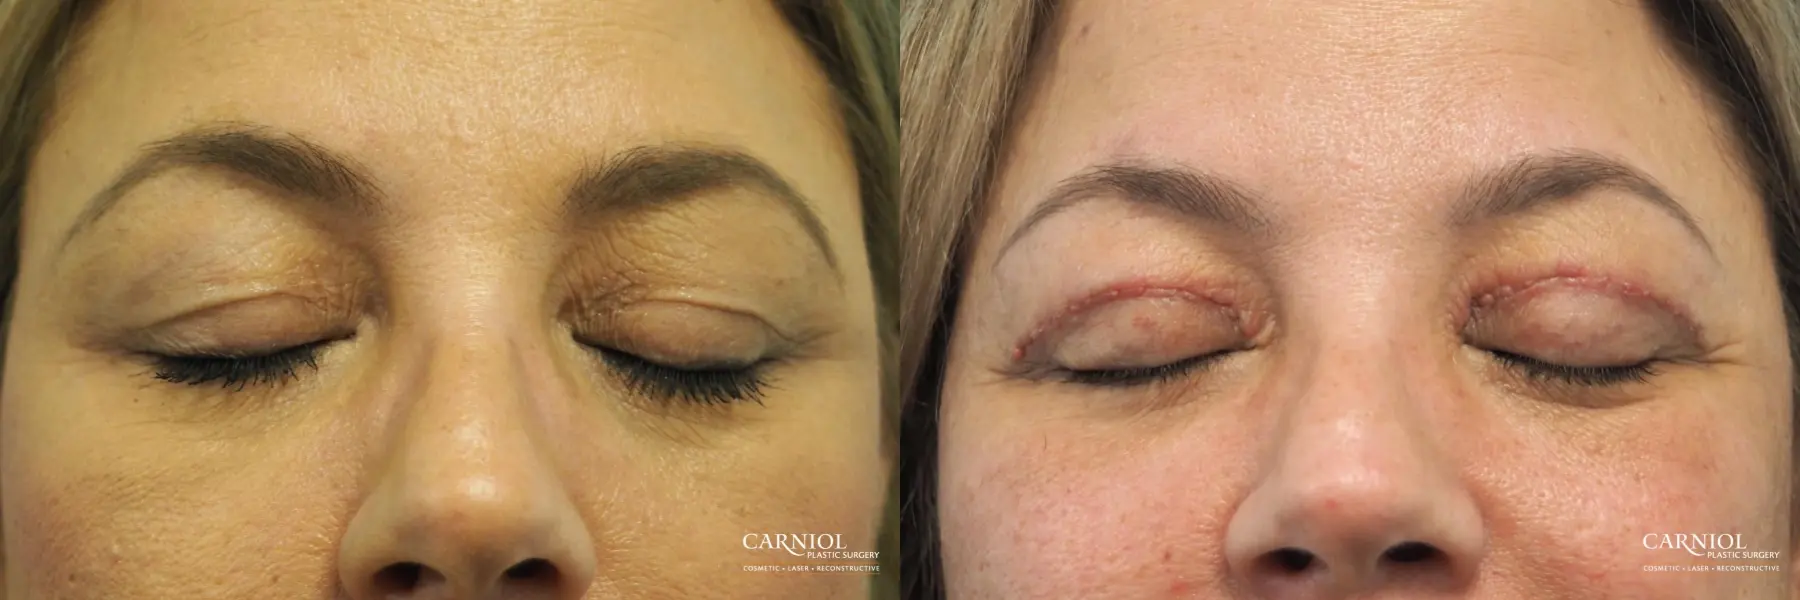 Blepharoplasty: Patient 5 - Before and After 2